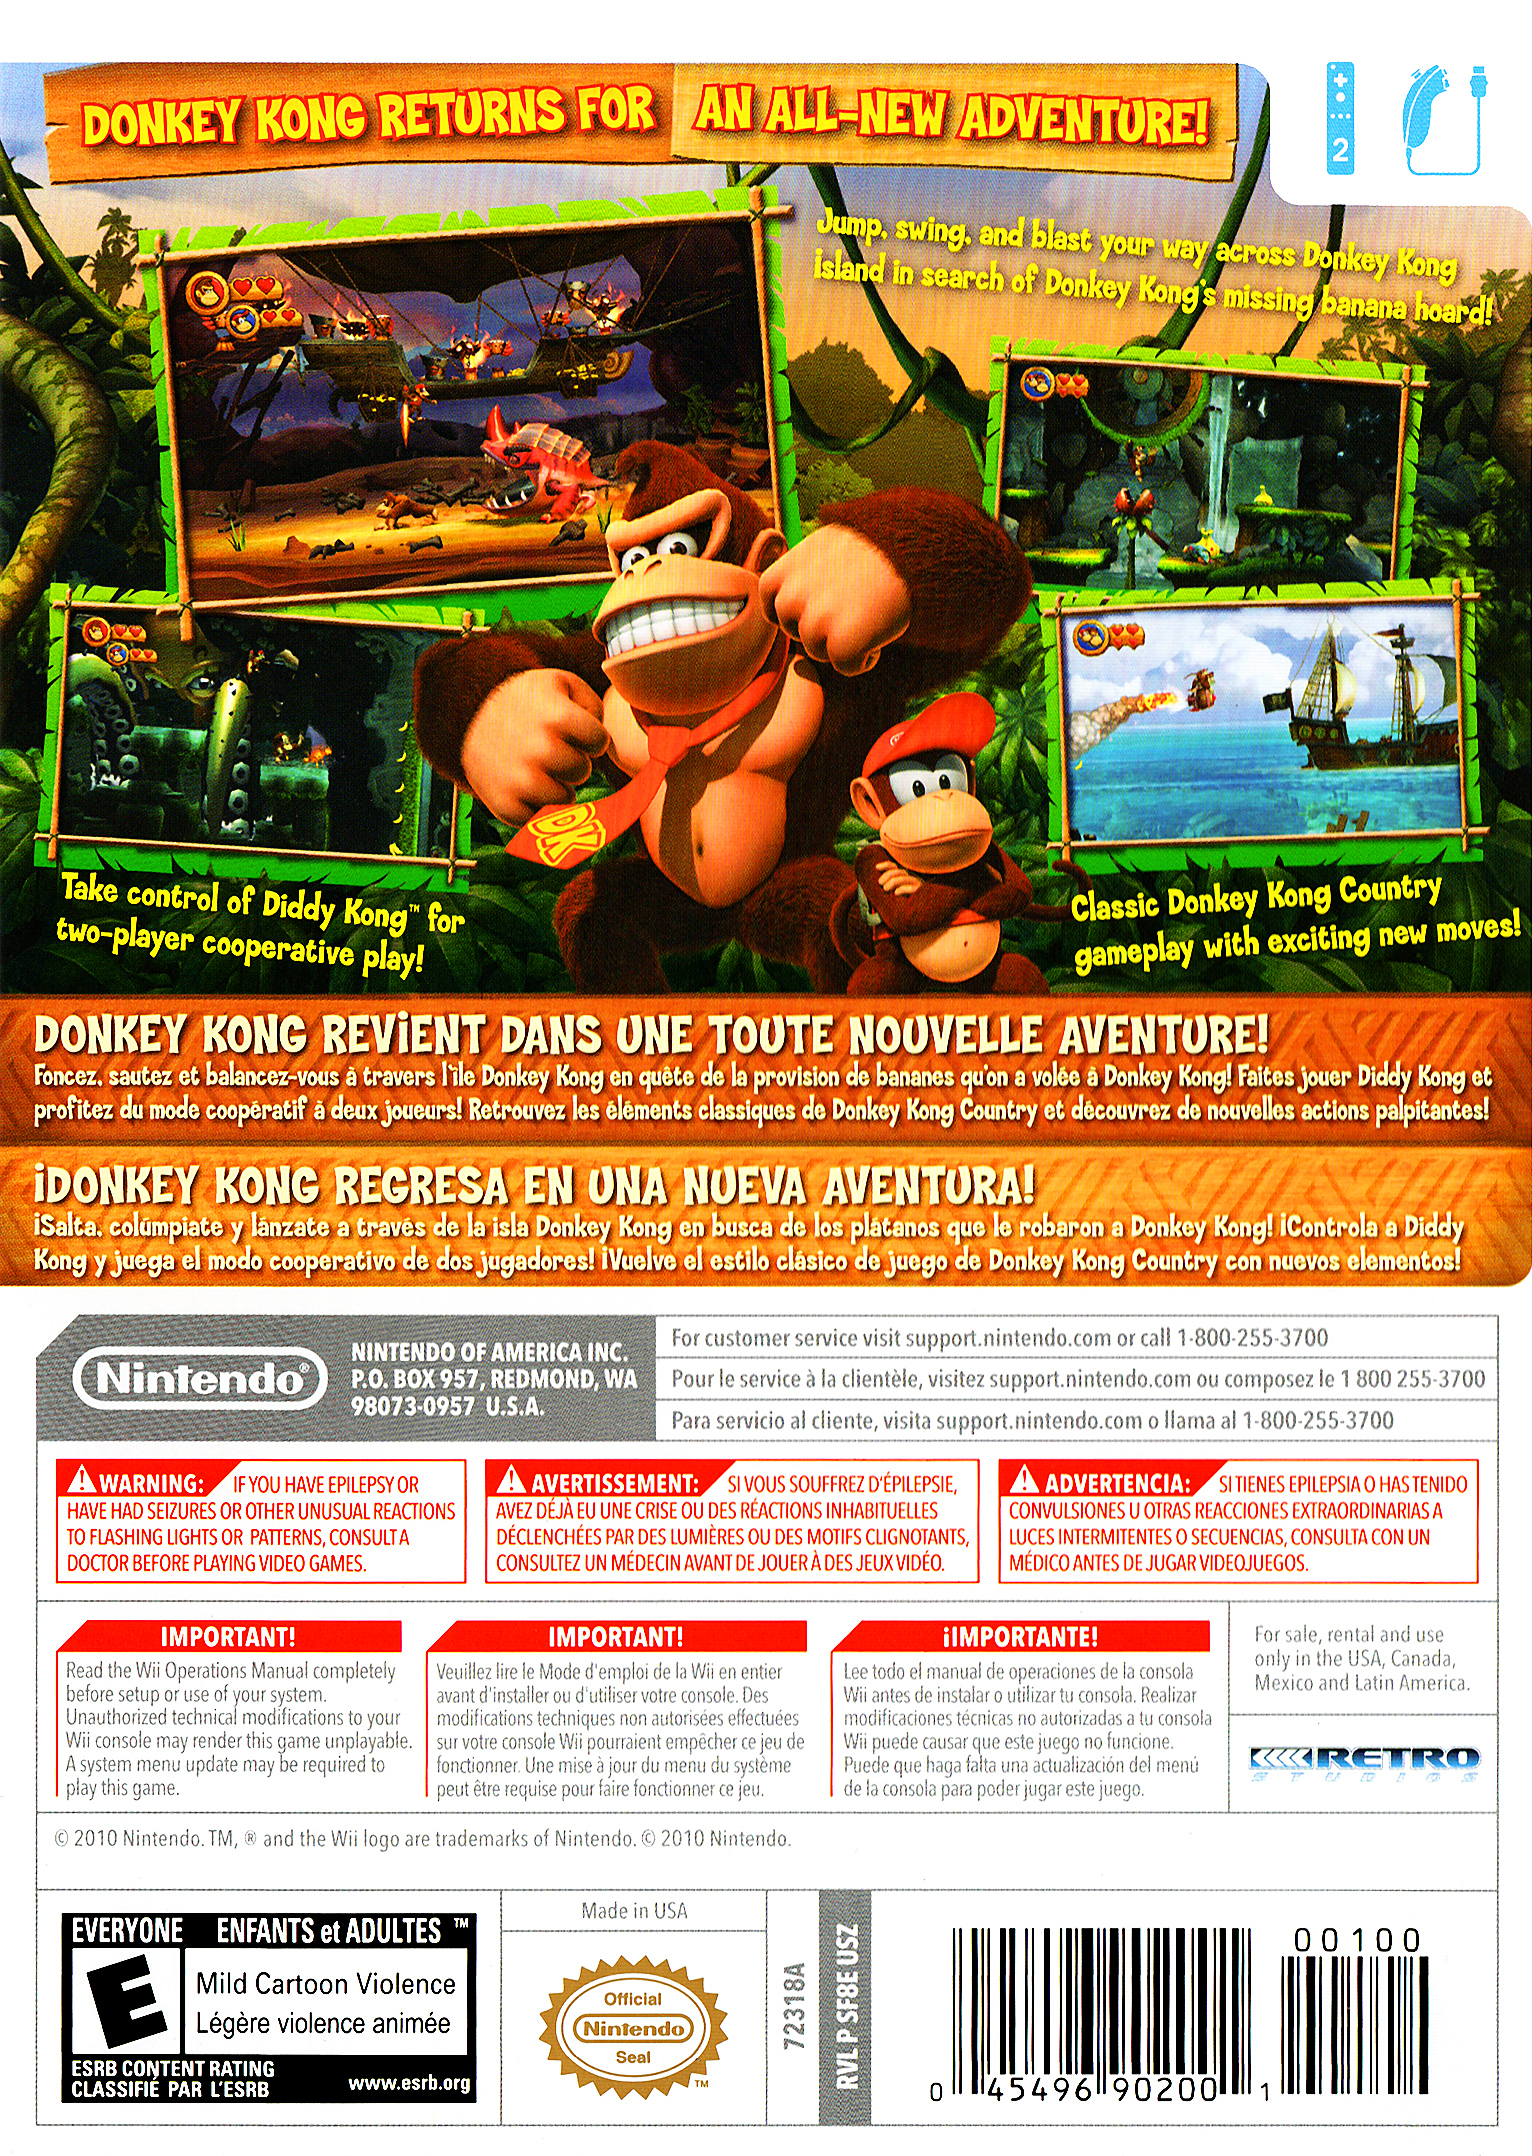 Donkey Kong Country Returns Picture